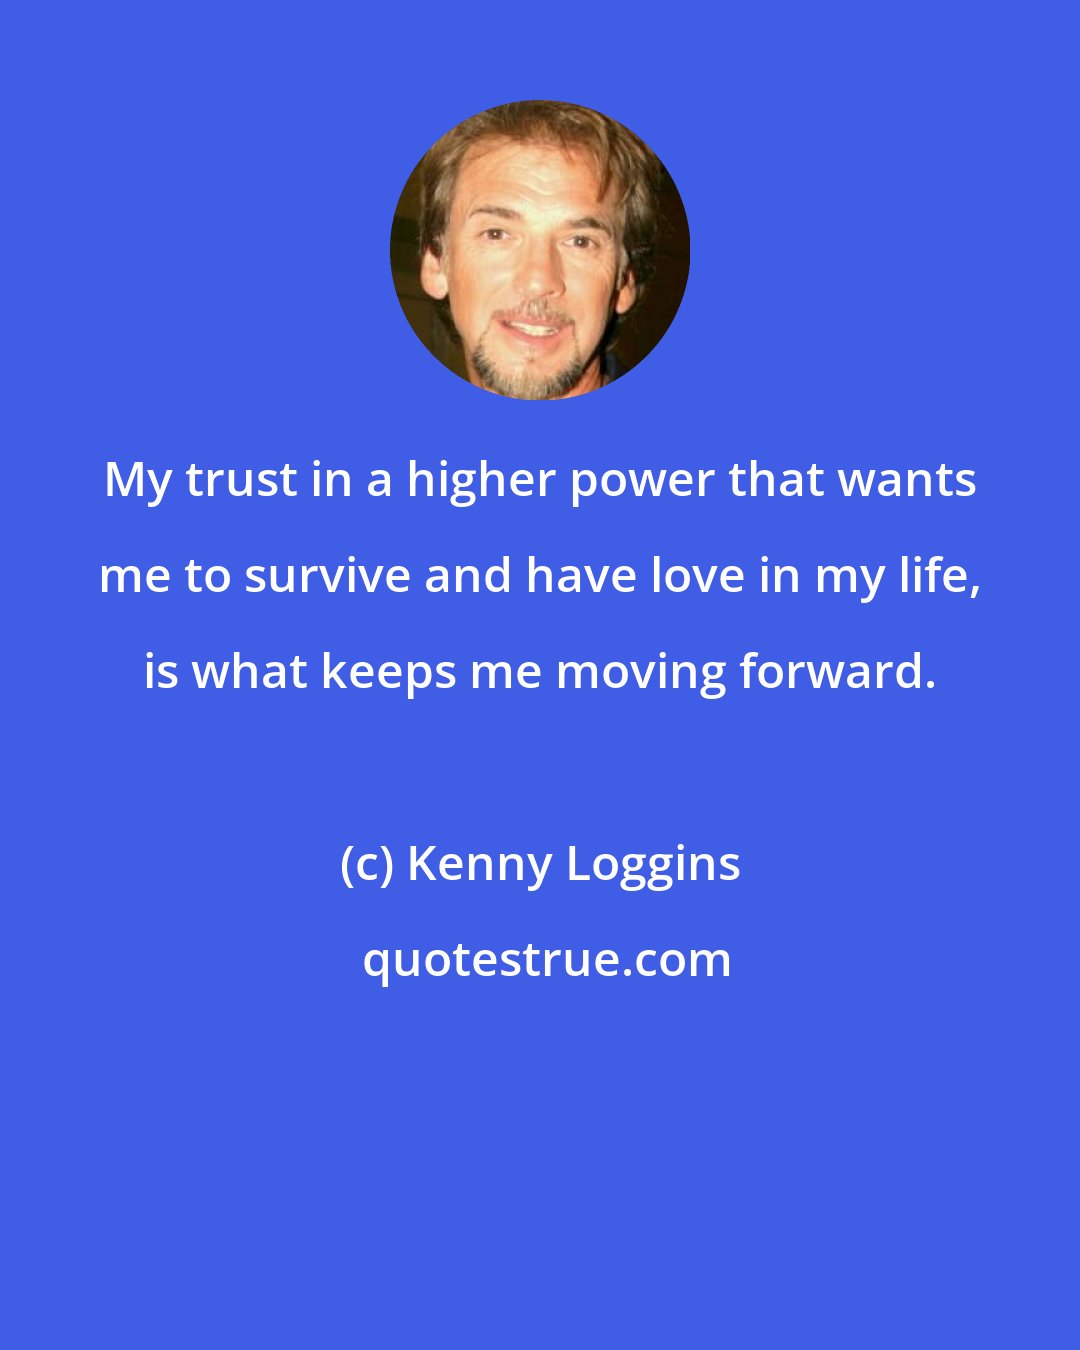 Kenny Loggins: My trust in a higher power that wants me to survive and have love in my life, is what keeps me moving forward.